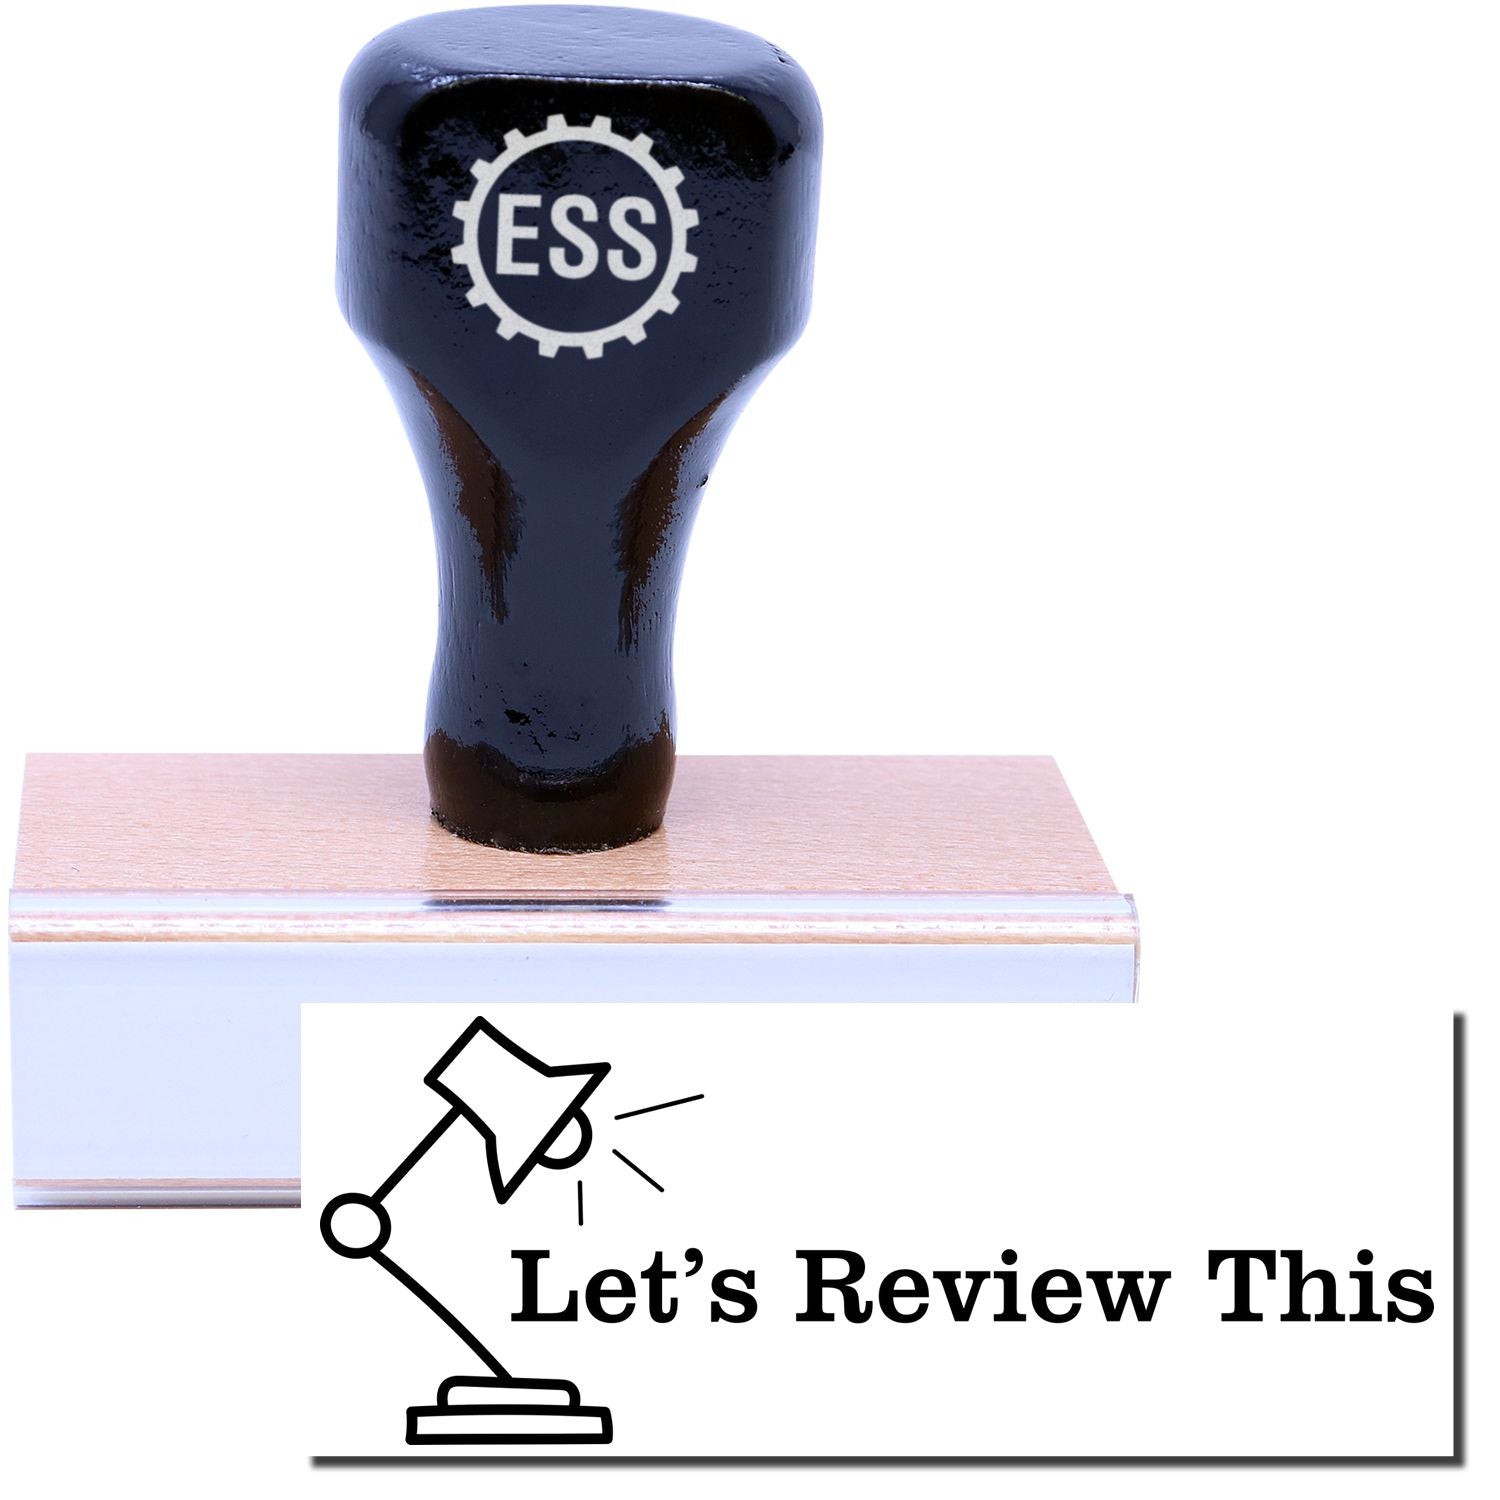 A stock office rubber stamp with a stamped image showing how the text "Let's Review This" with an image of a lamp on the left side is displayed after stamping.